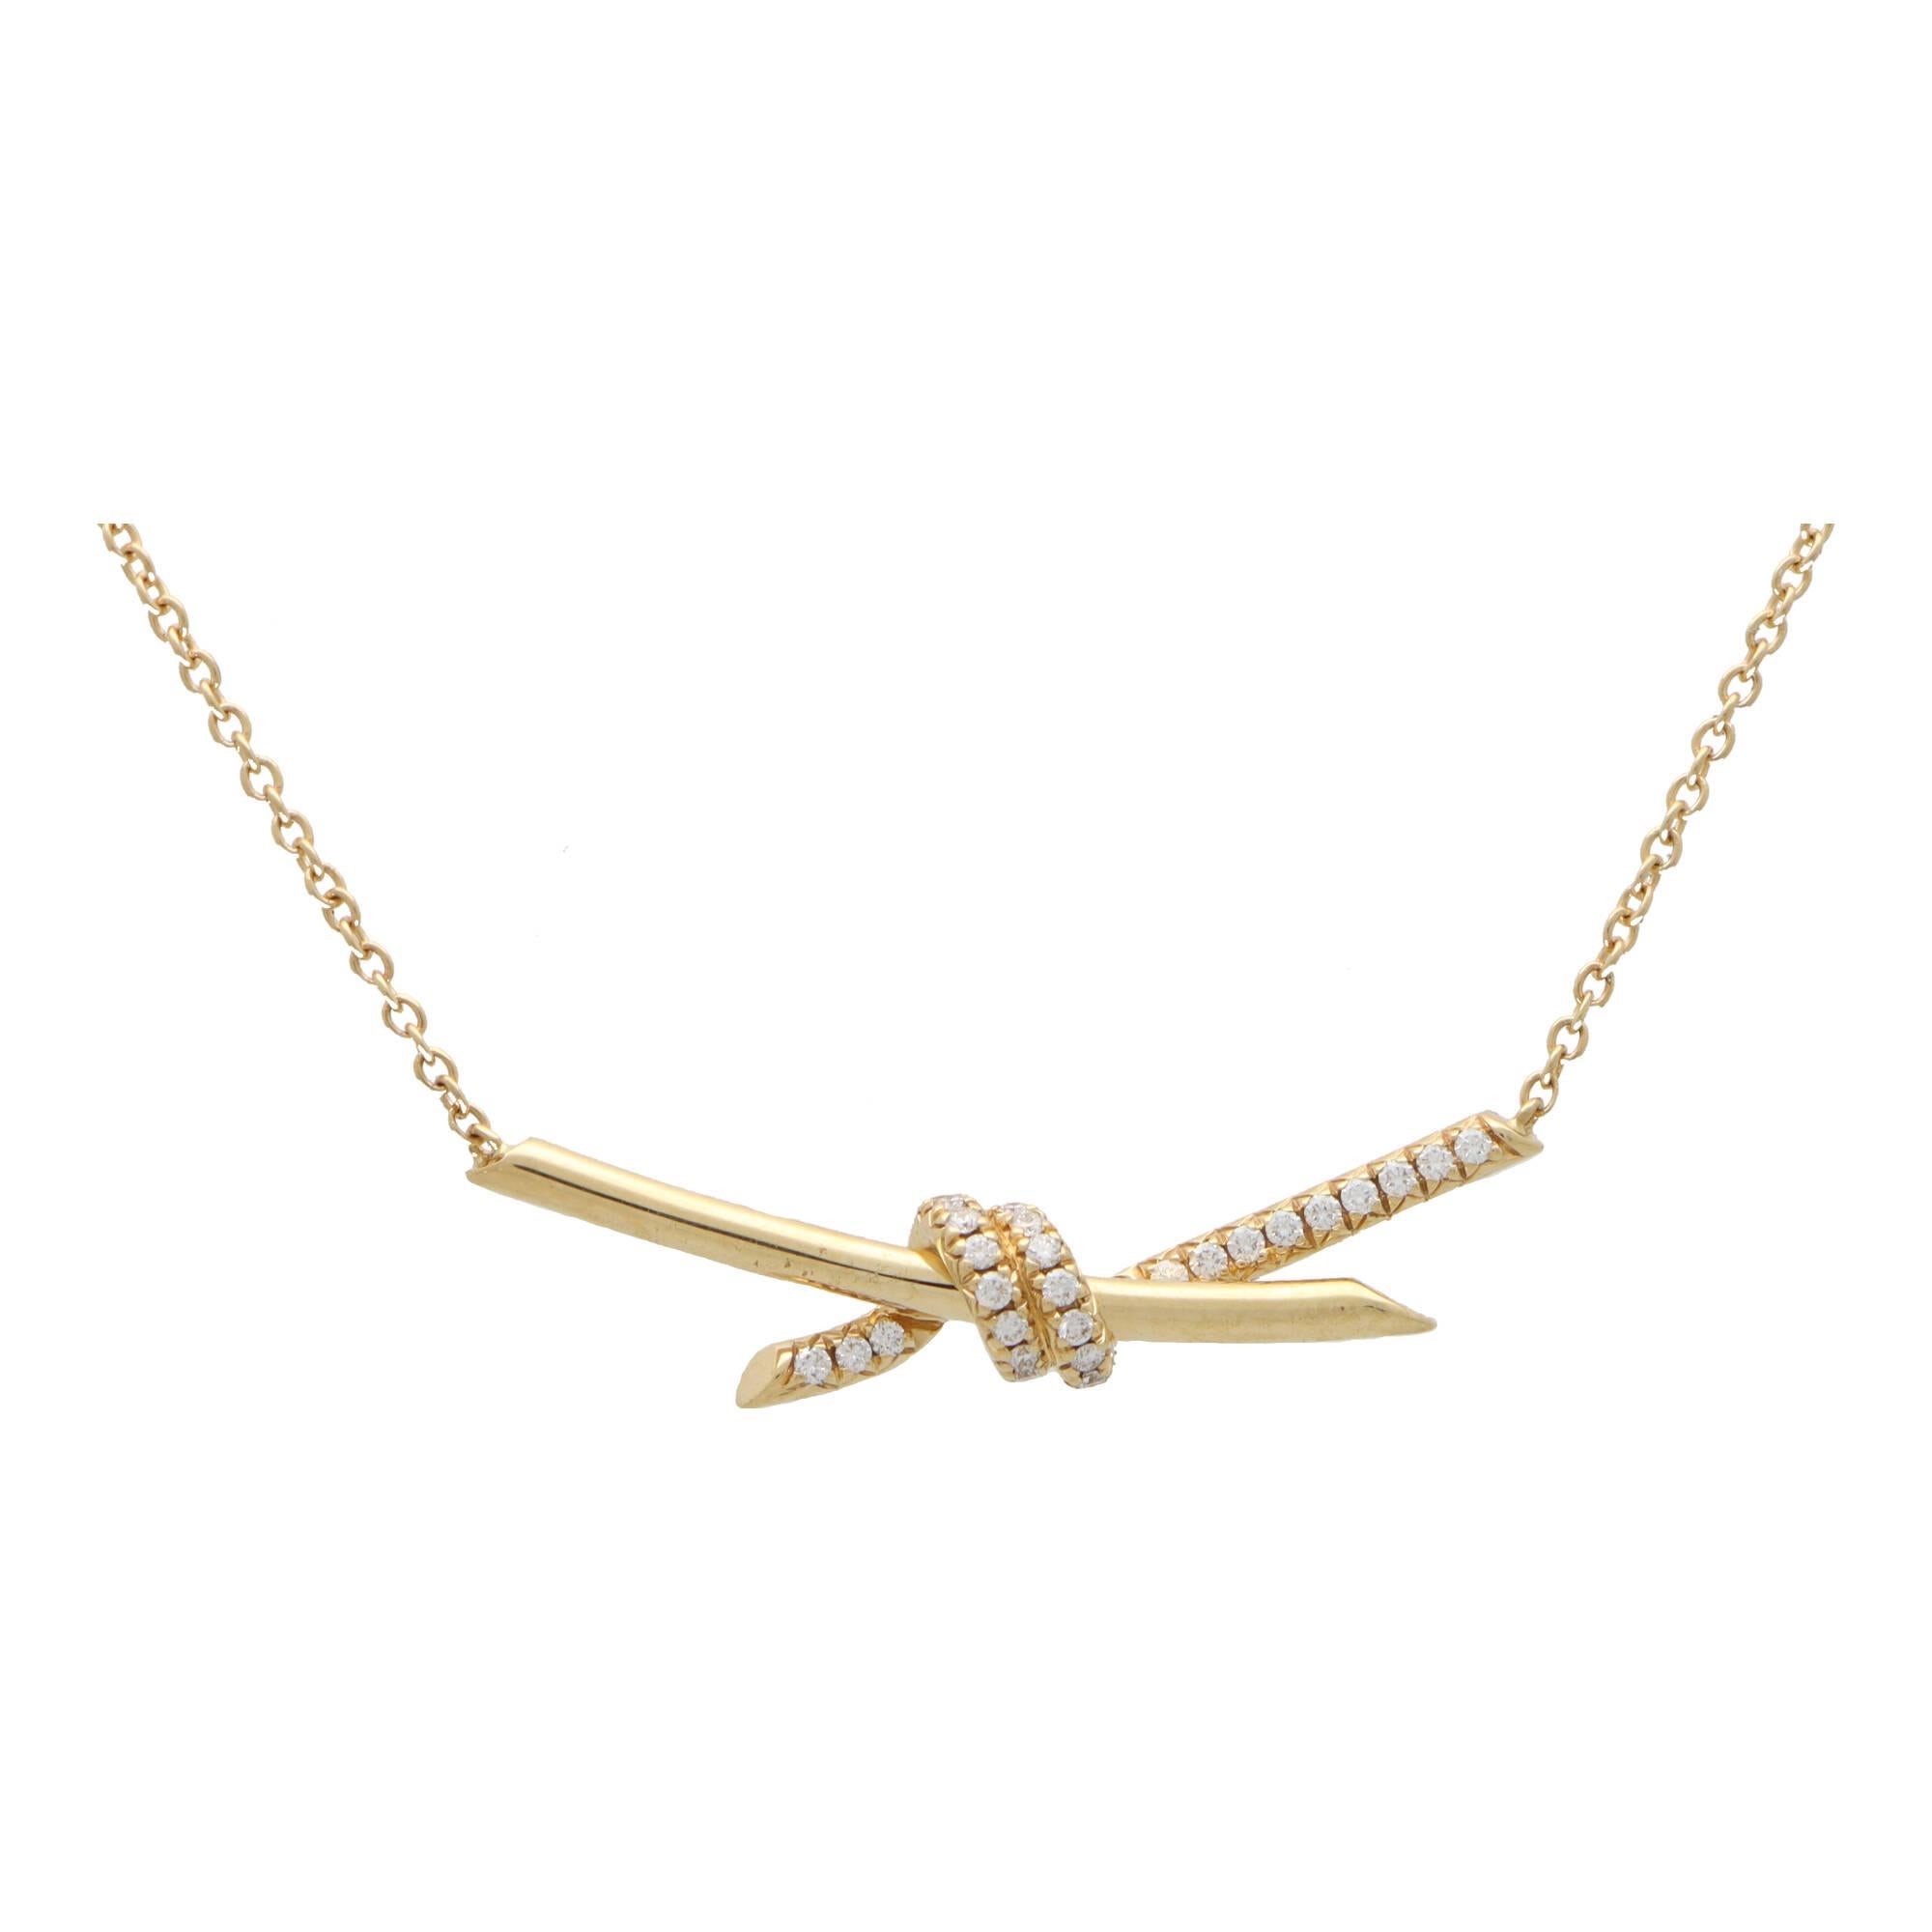 A beautiful vintage Tiffany & Co. knot pendant necklace set in 18k yellow gold.

From the current ‘Tiffany Knots’ collection, the pendant depicts an elegant knot motif; pave set with 31 round brilliant cut diamonds. The knot hangs from a 15-17 inch